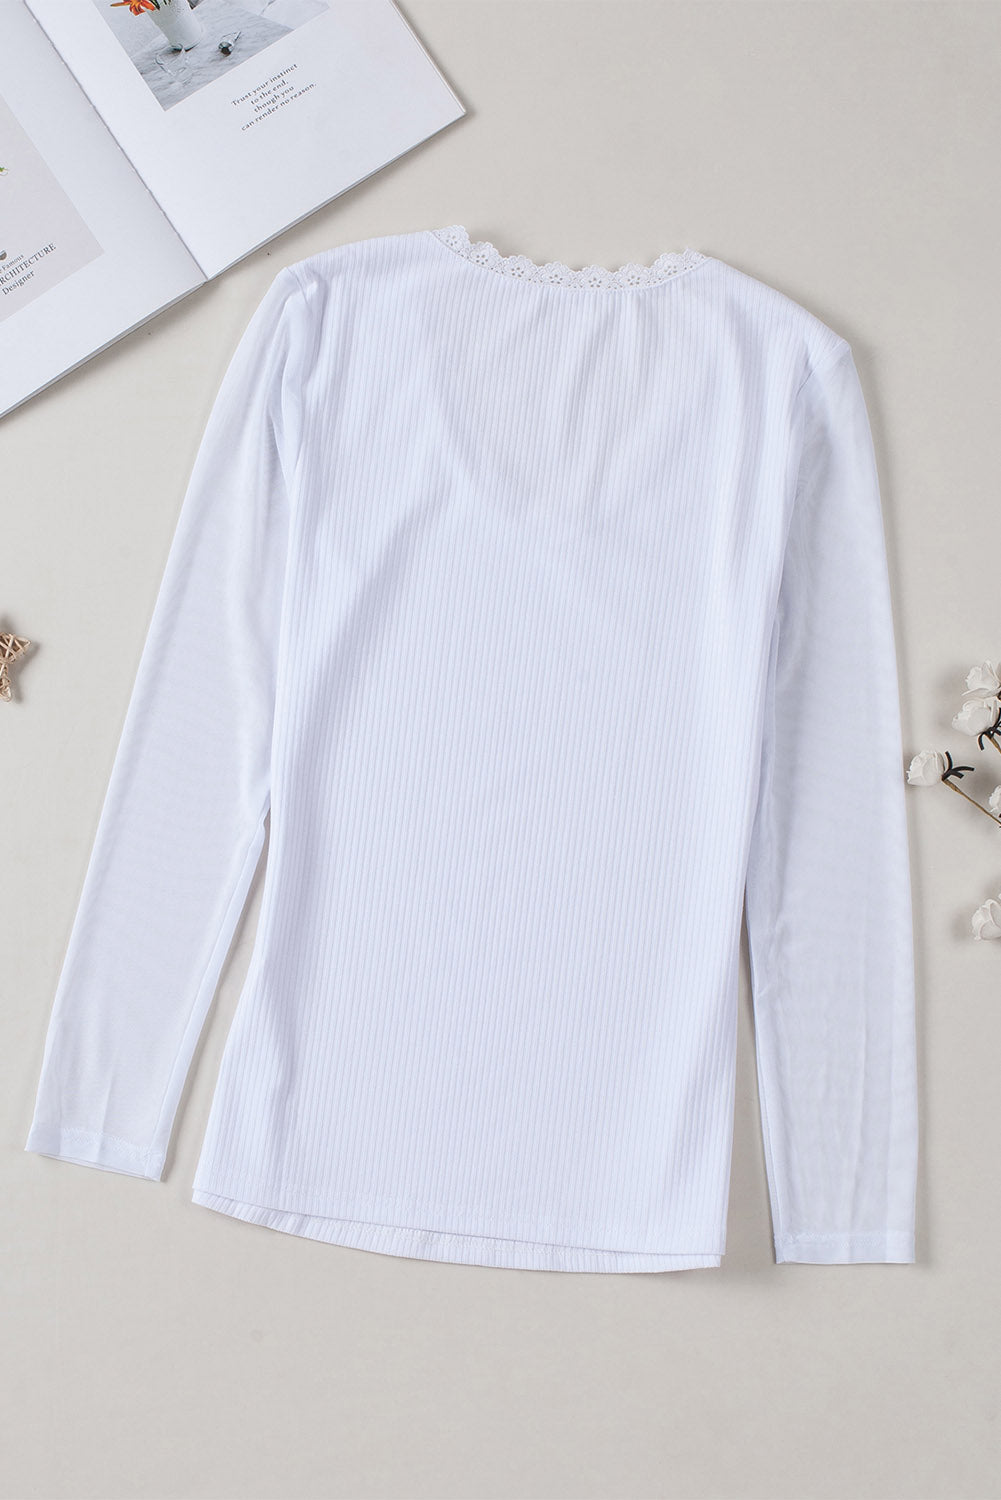 White Lace Trim Round Neck Mesh Sleeve Ribbed Top